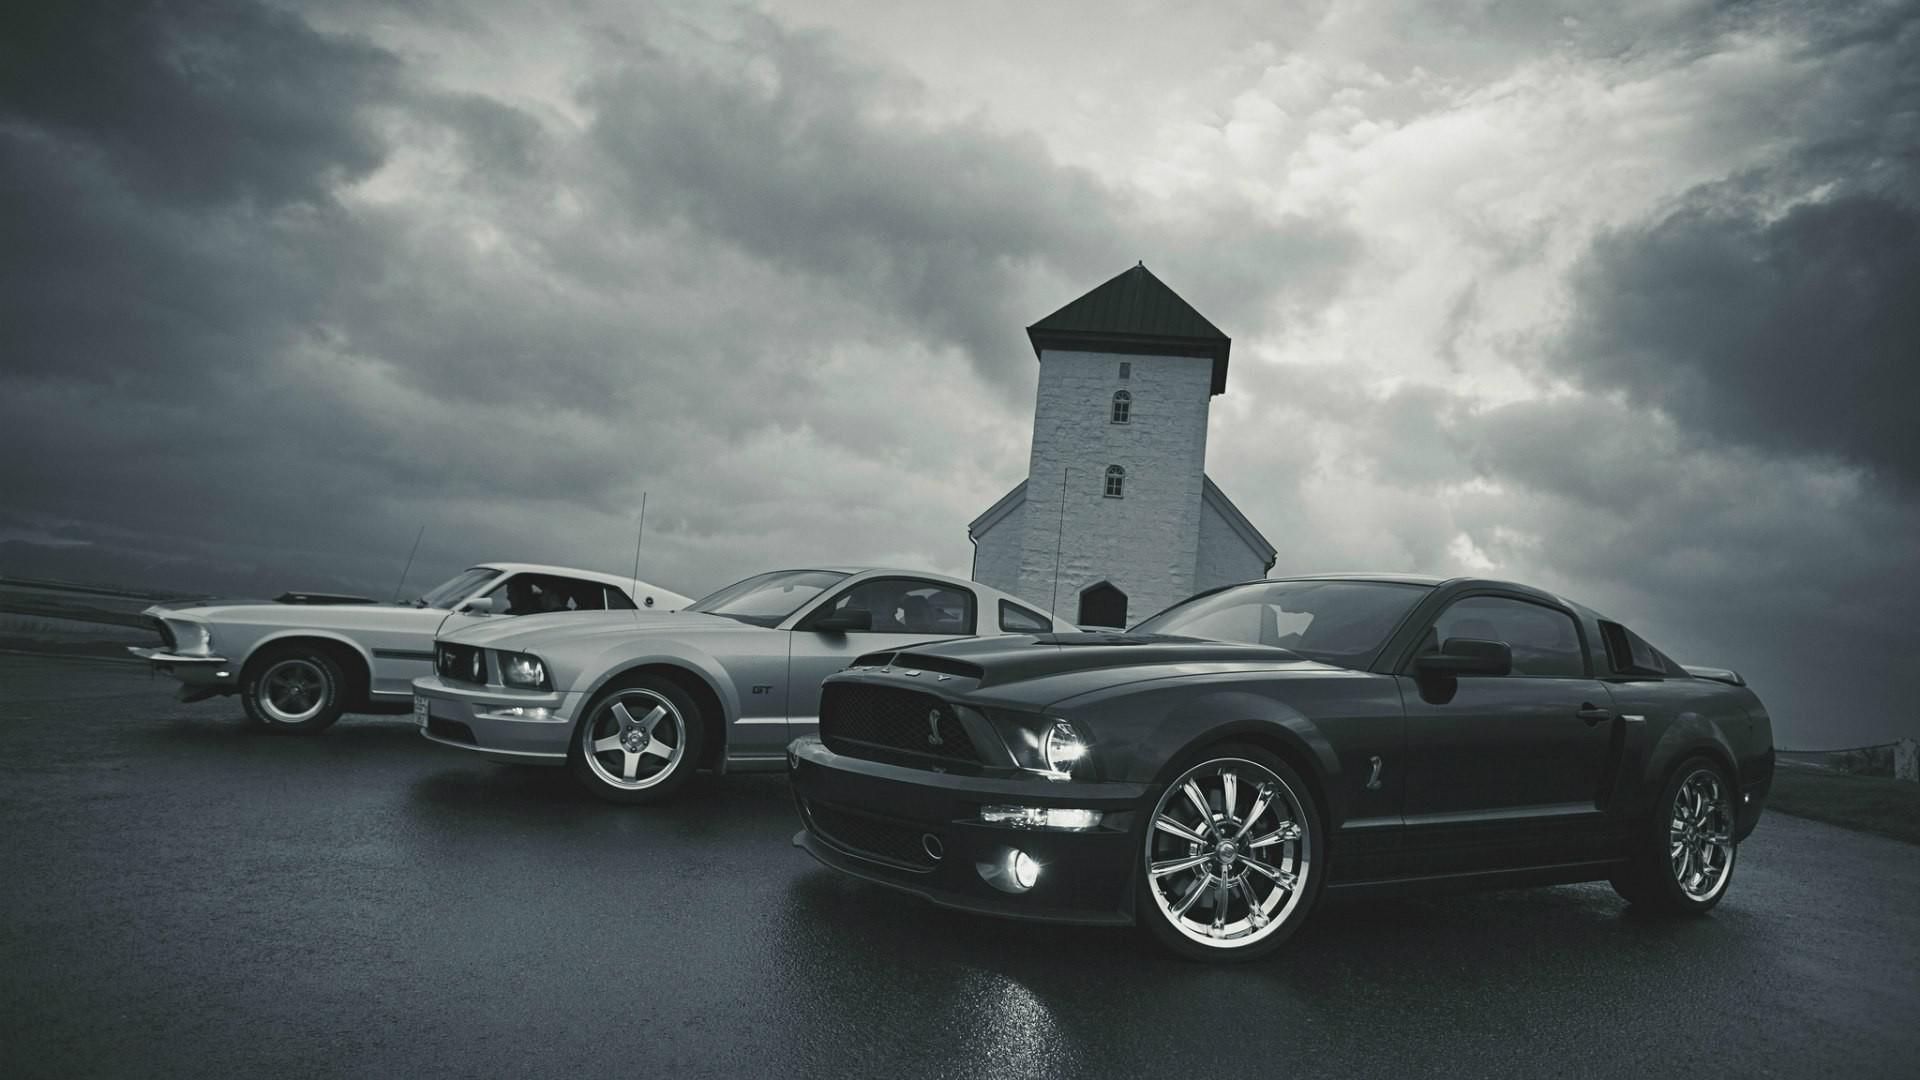 1080x1920 Ford Mustang Monochrome 4k Iphone 76s6 Plus Pixel xl One Plus  33t5 HD 4k Wallpapers Images Backgrounds Photos and Pictures